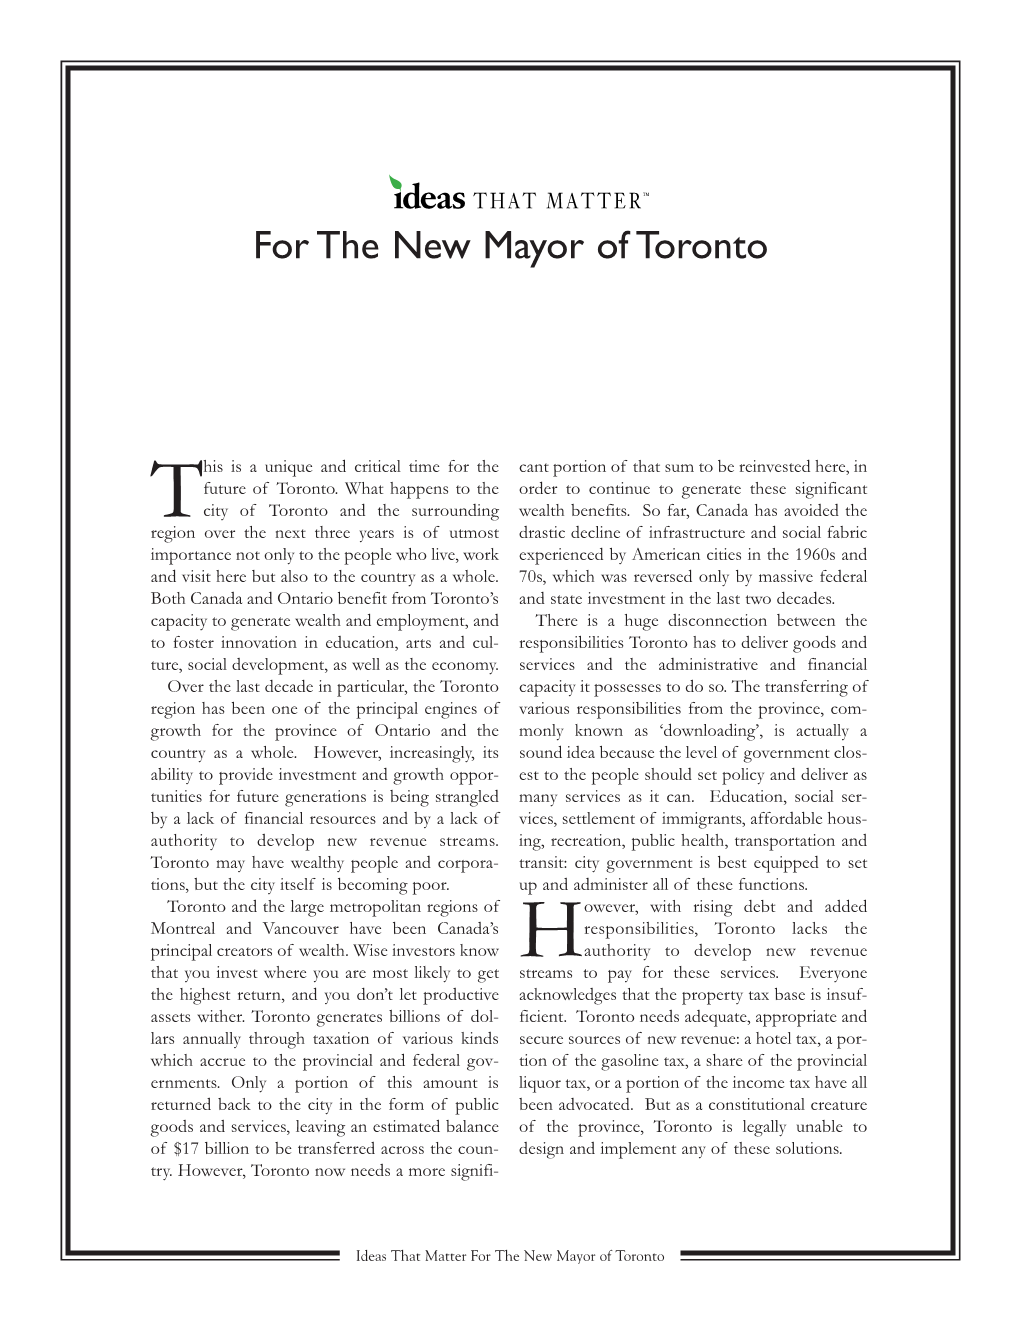 Read Ideas That Matter for the New Mayor of Toronto